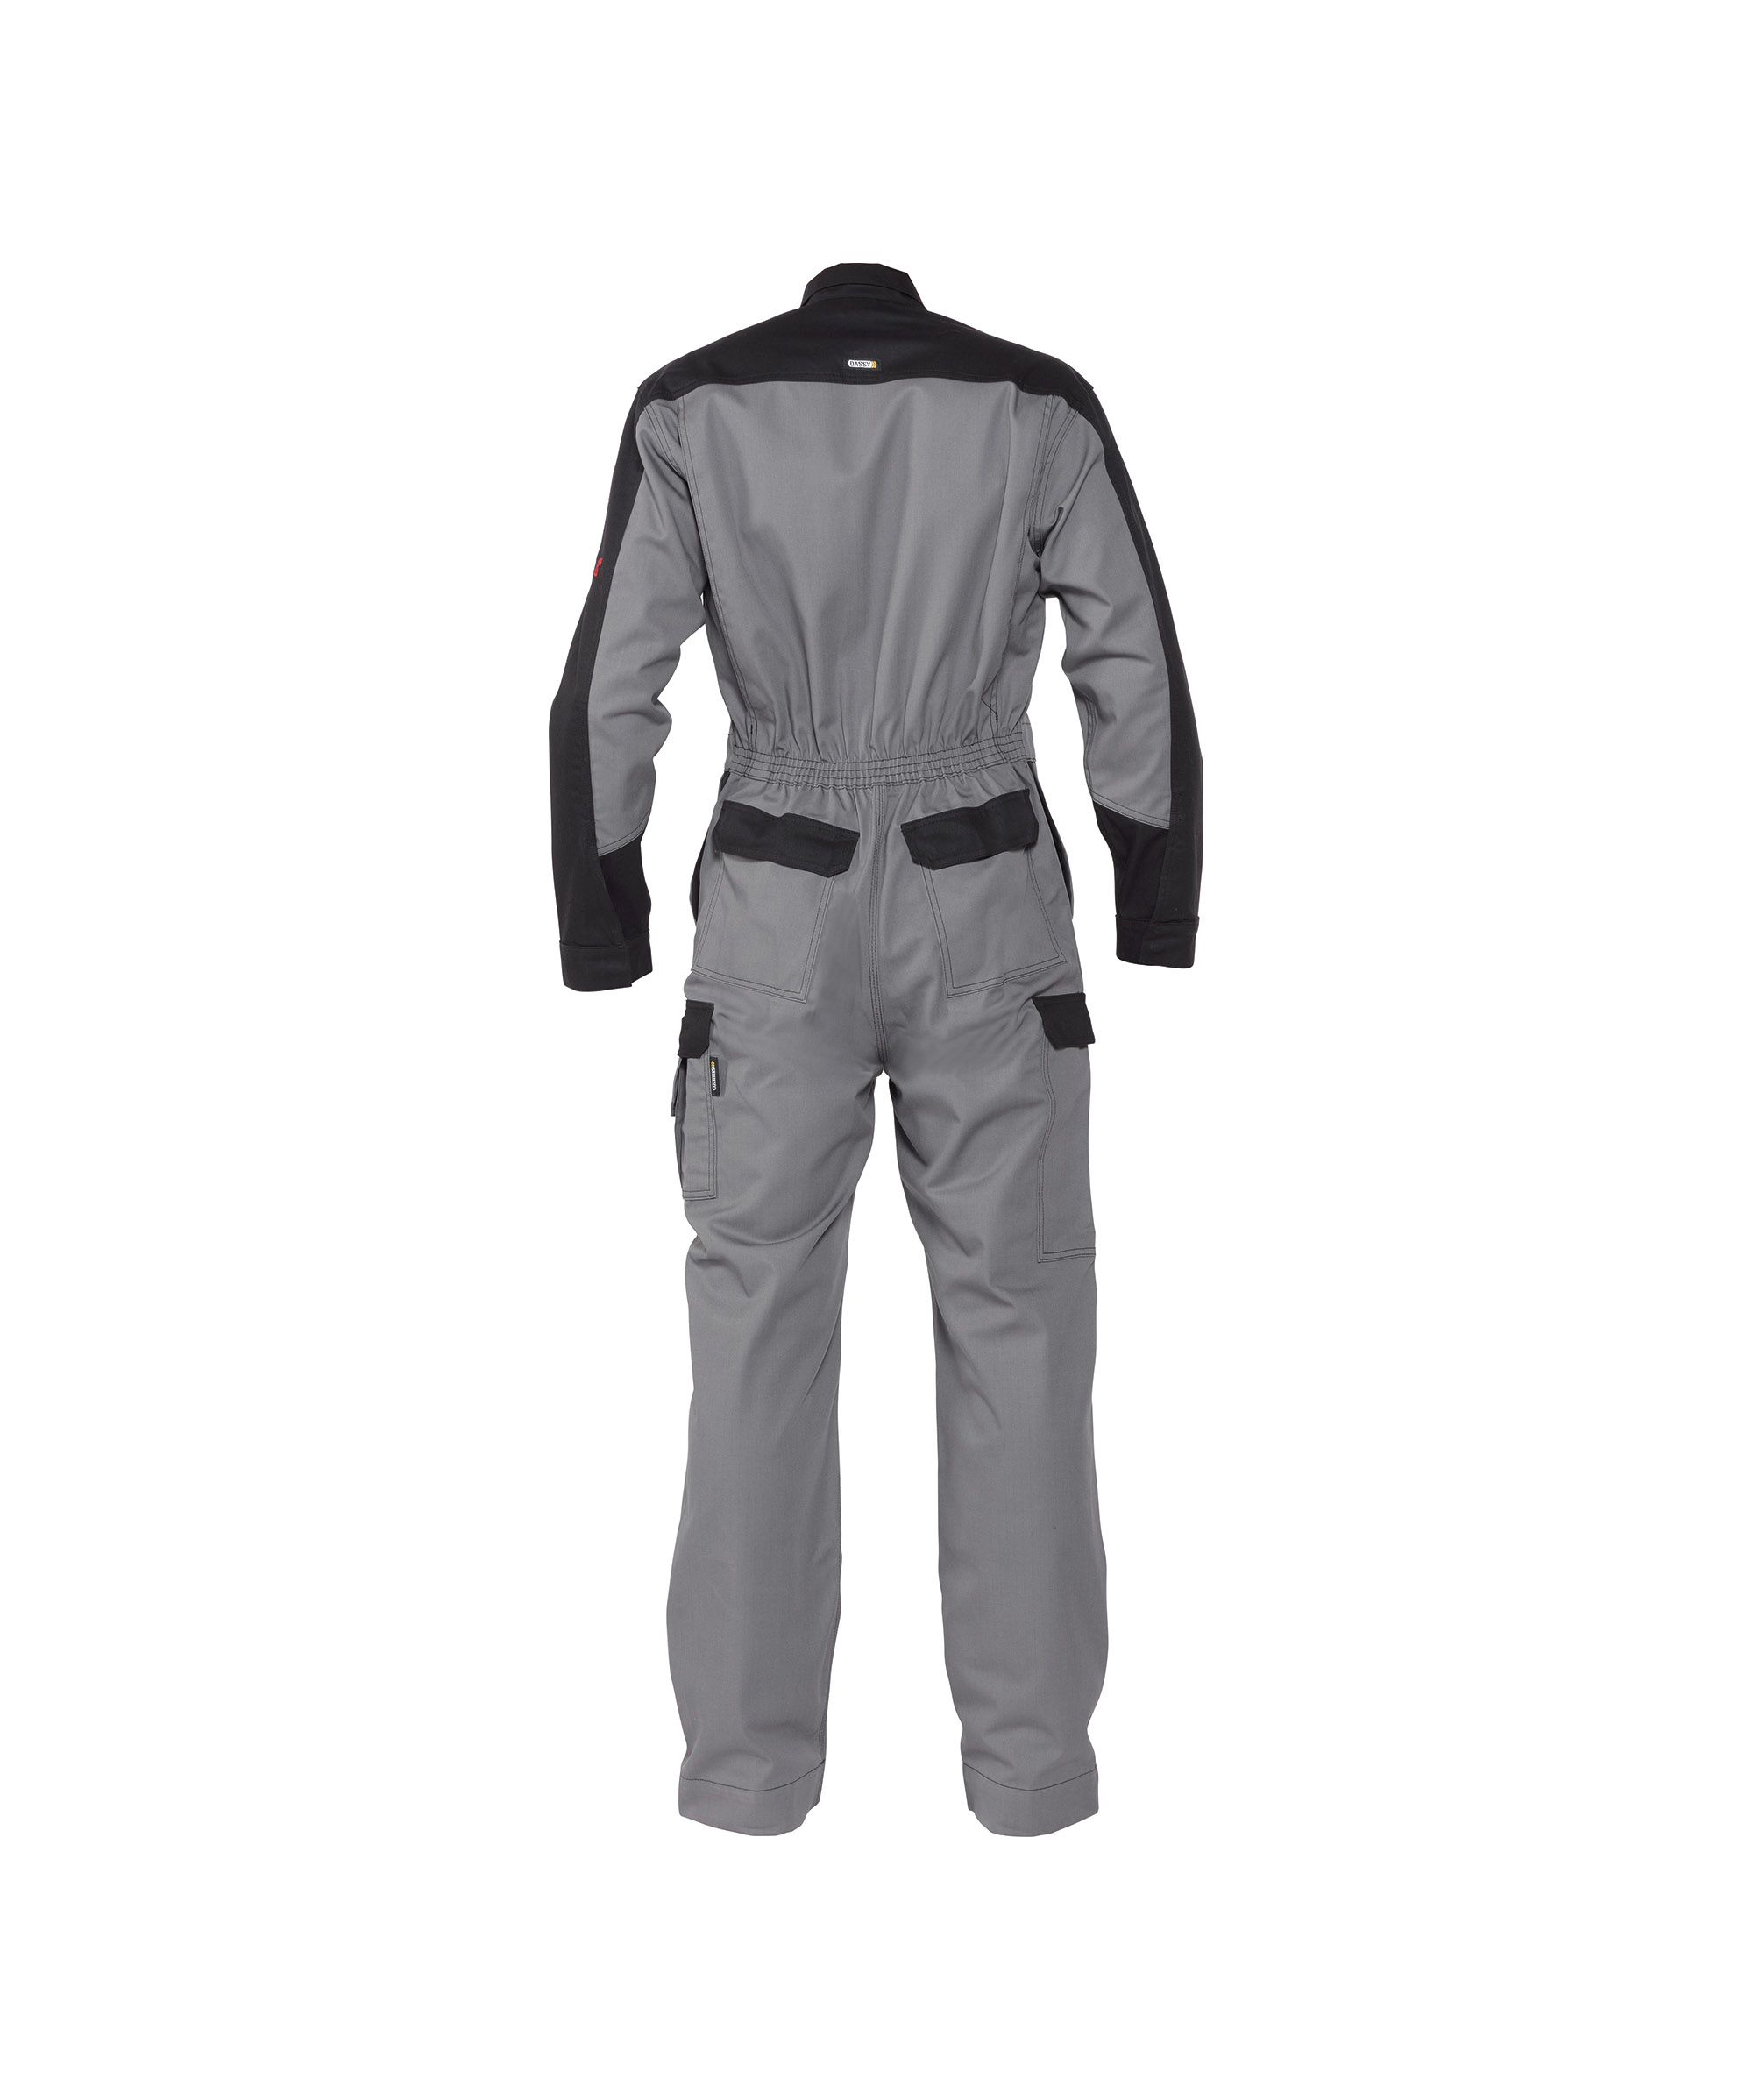 niort_two-tone-multinorm-overall-with-knee-pockets_graphite-grey-black_back.jpg